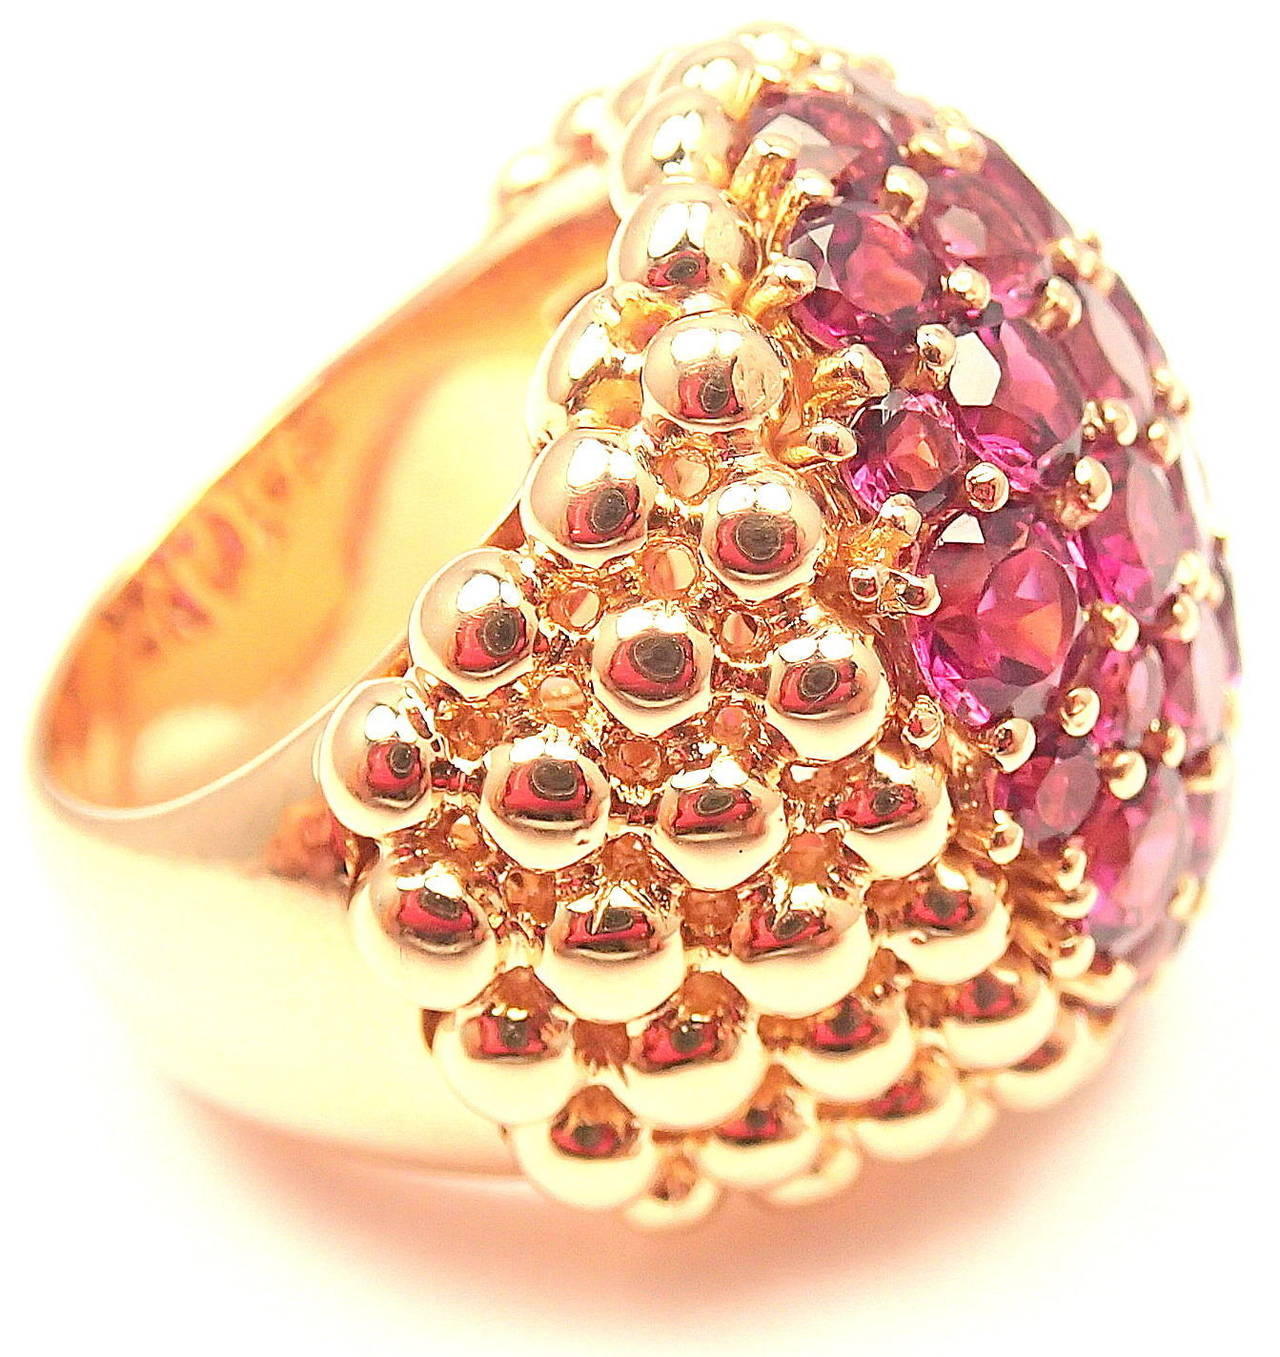 18k Rose Gold BRUNISSIMI Ruby Ring by Pasquale Bruni.
With ruby stones total weight approximately 6.91ct.

This ring comes with Box, Certificate and Tag.

Details:
Size: 7
Width: 25mm
Weight: 25.7 grams
Stamped Hallmarks: Pasquale Bruni